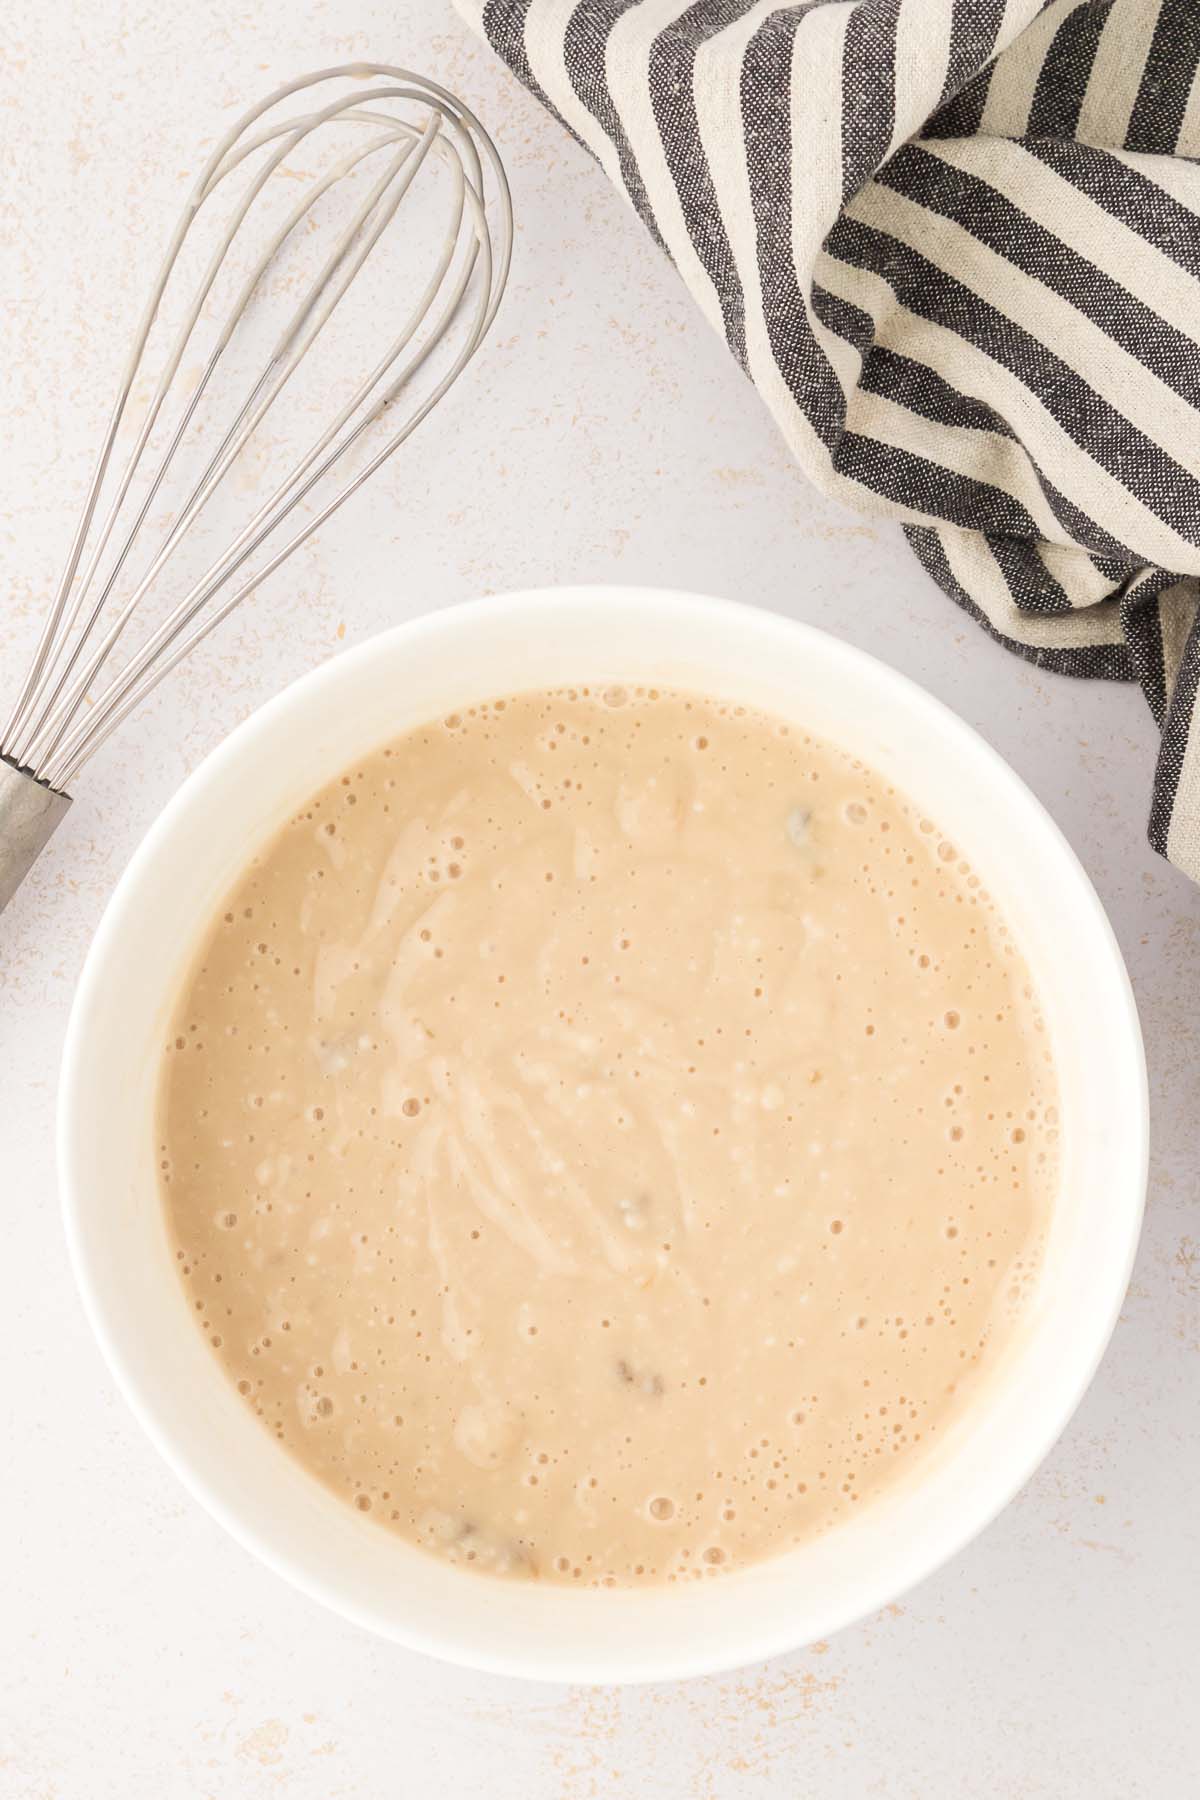 Cream of mushroom soup mixed with soy sauce.